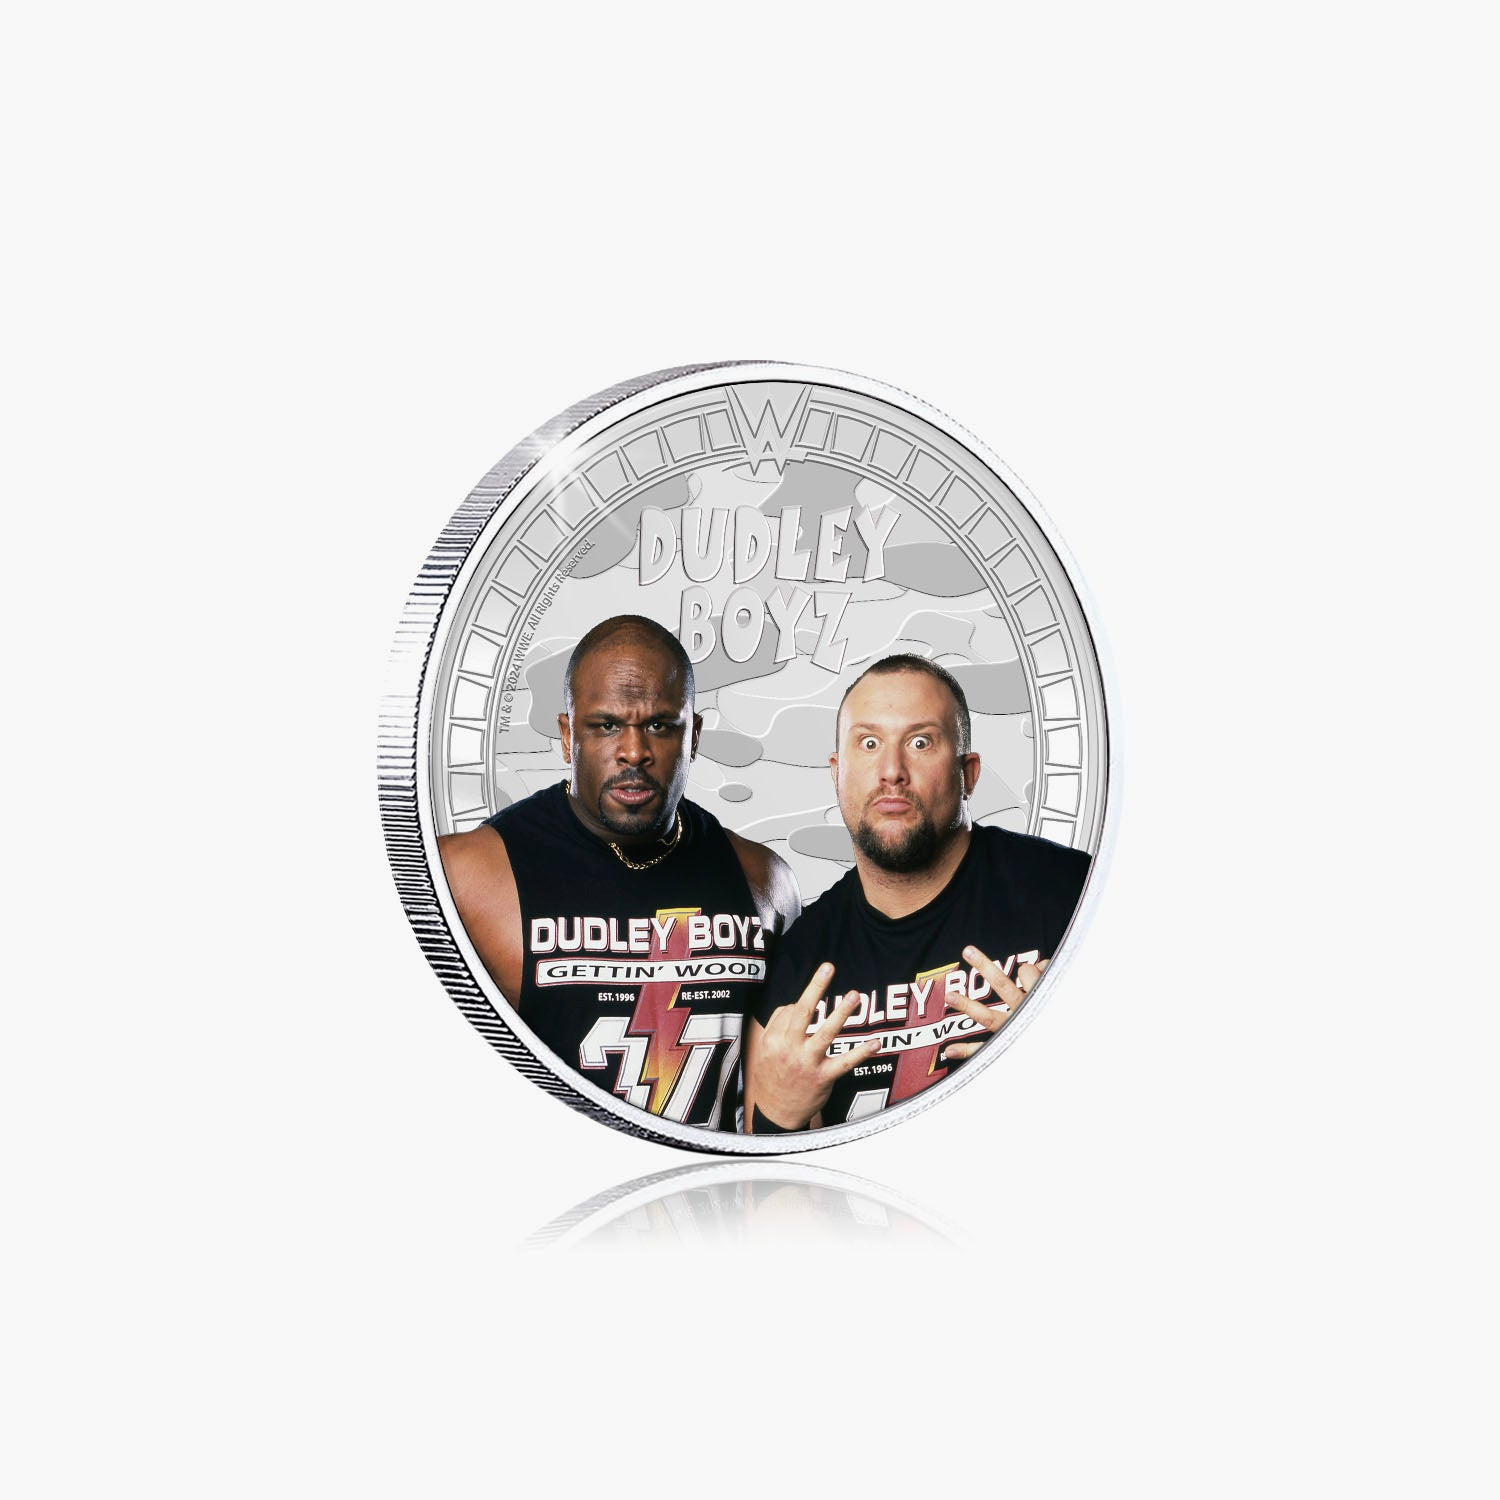 WWE Commemorative Collection - Dudley Boyz - 32mm Silver Plated Commemorative